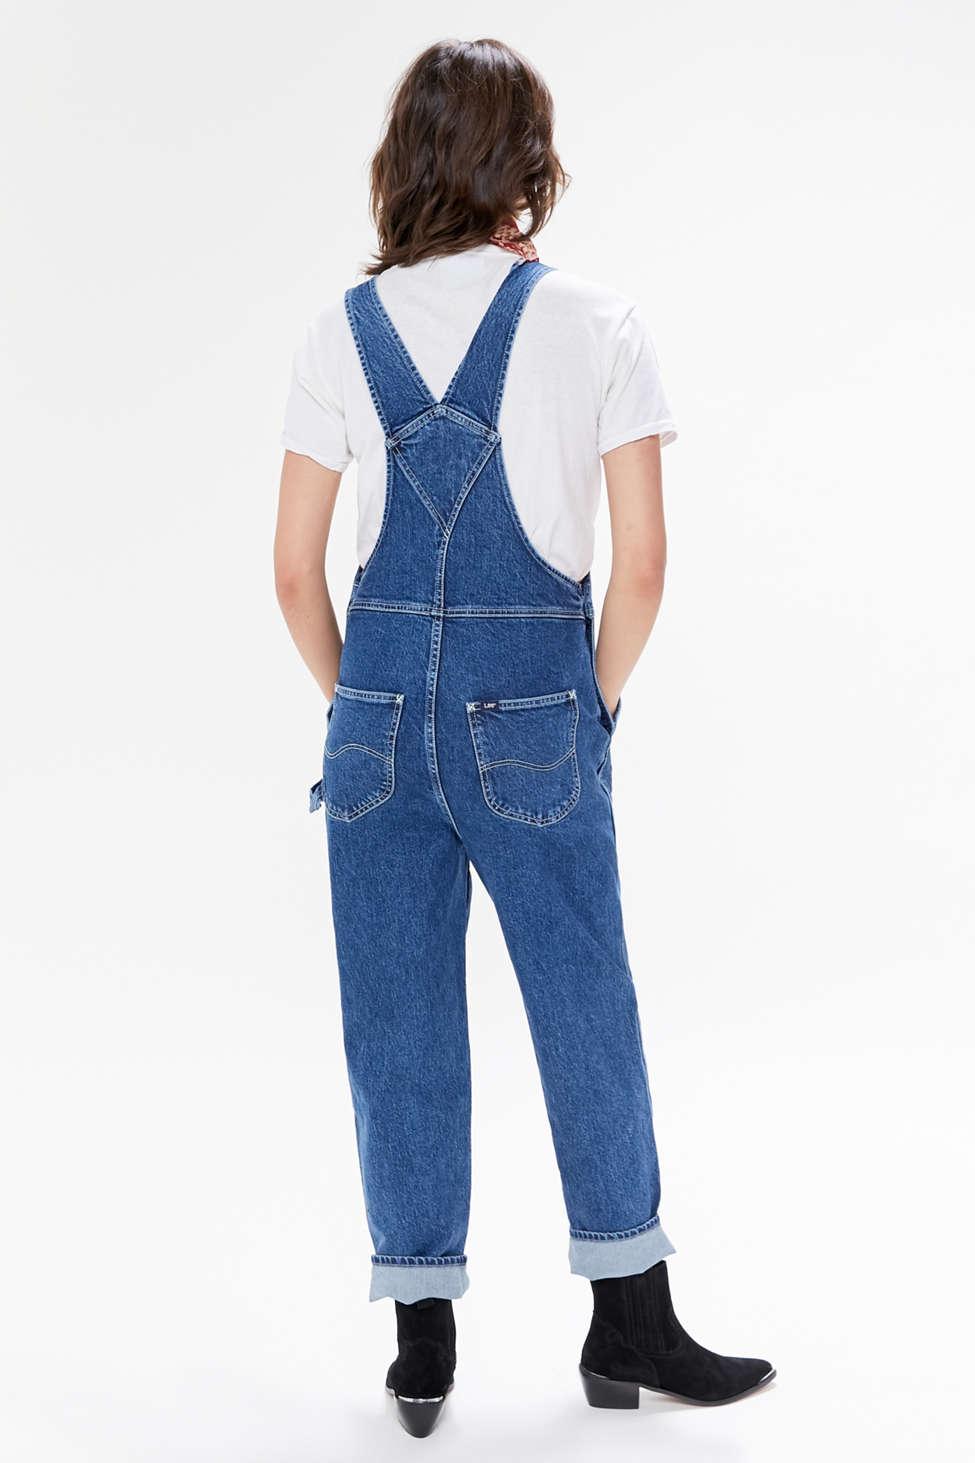 Lee Jeans Uo Exclusive Denim Overall in Blue - Lyst